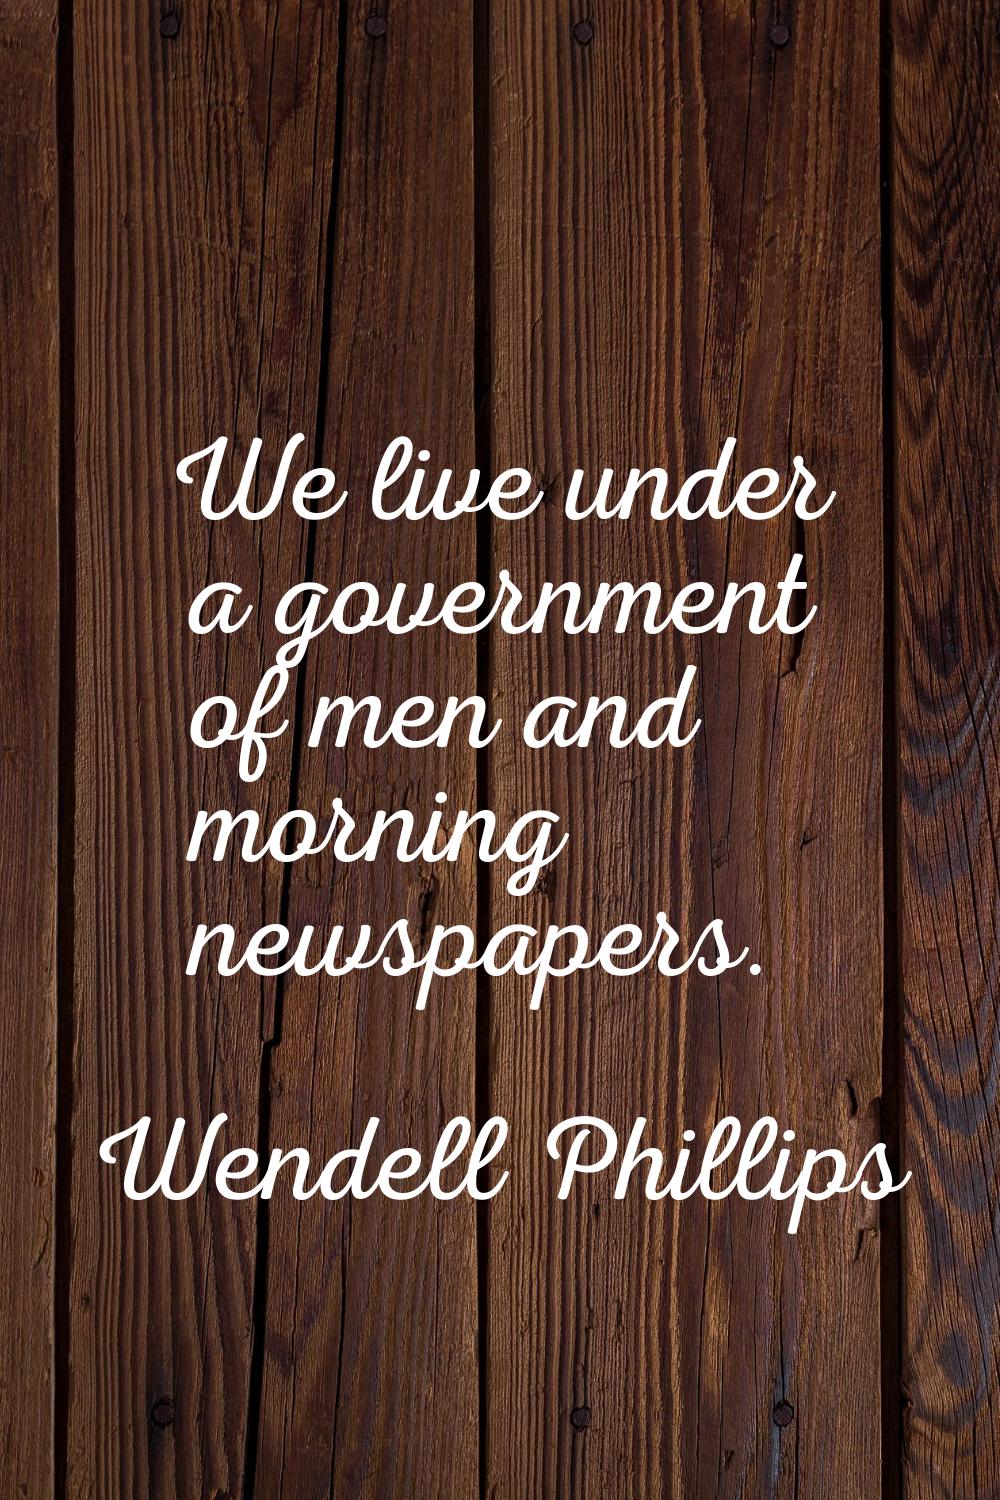 We live under a government of men and morning newspapers.